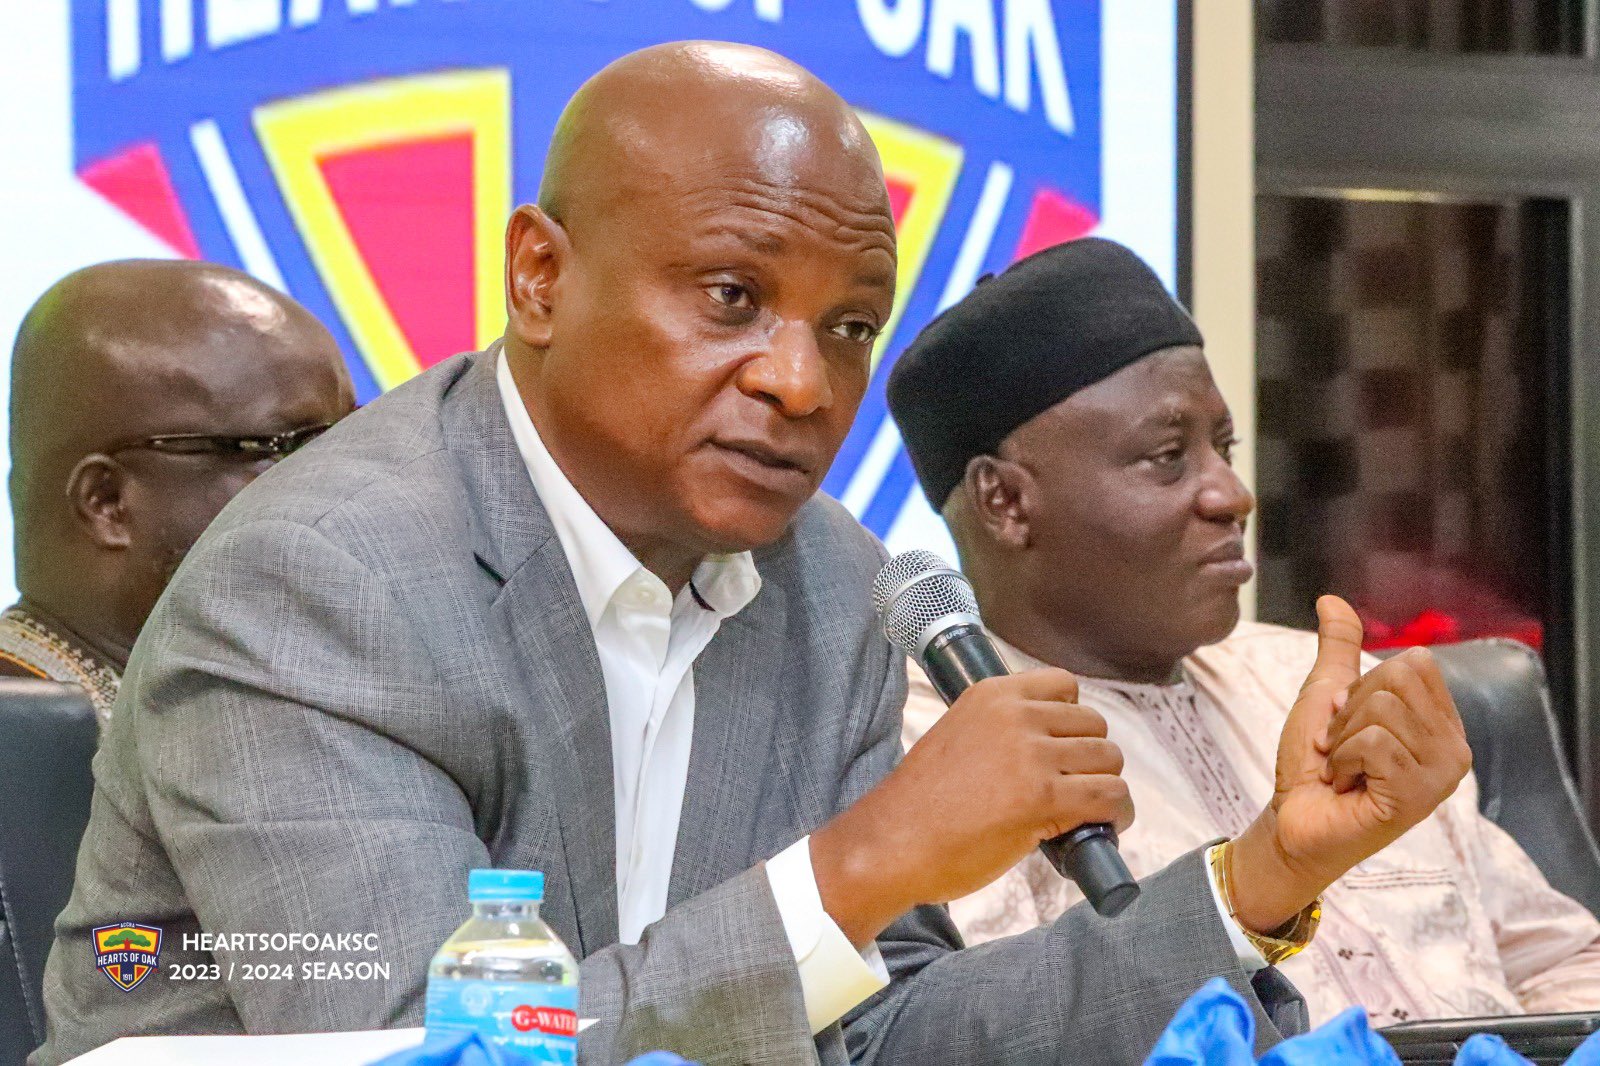 A house divided against itself can’t stand – Togbe Afede to Hearts of Oak stakeholders